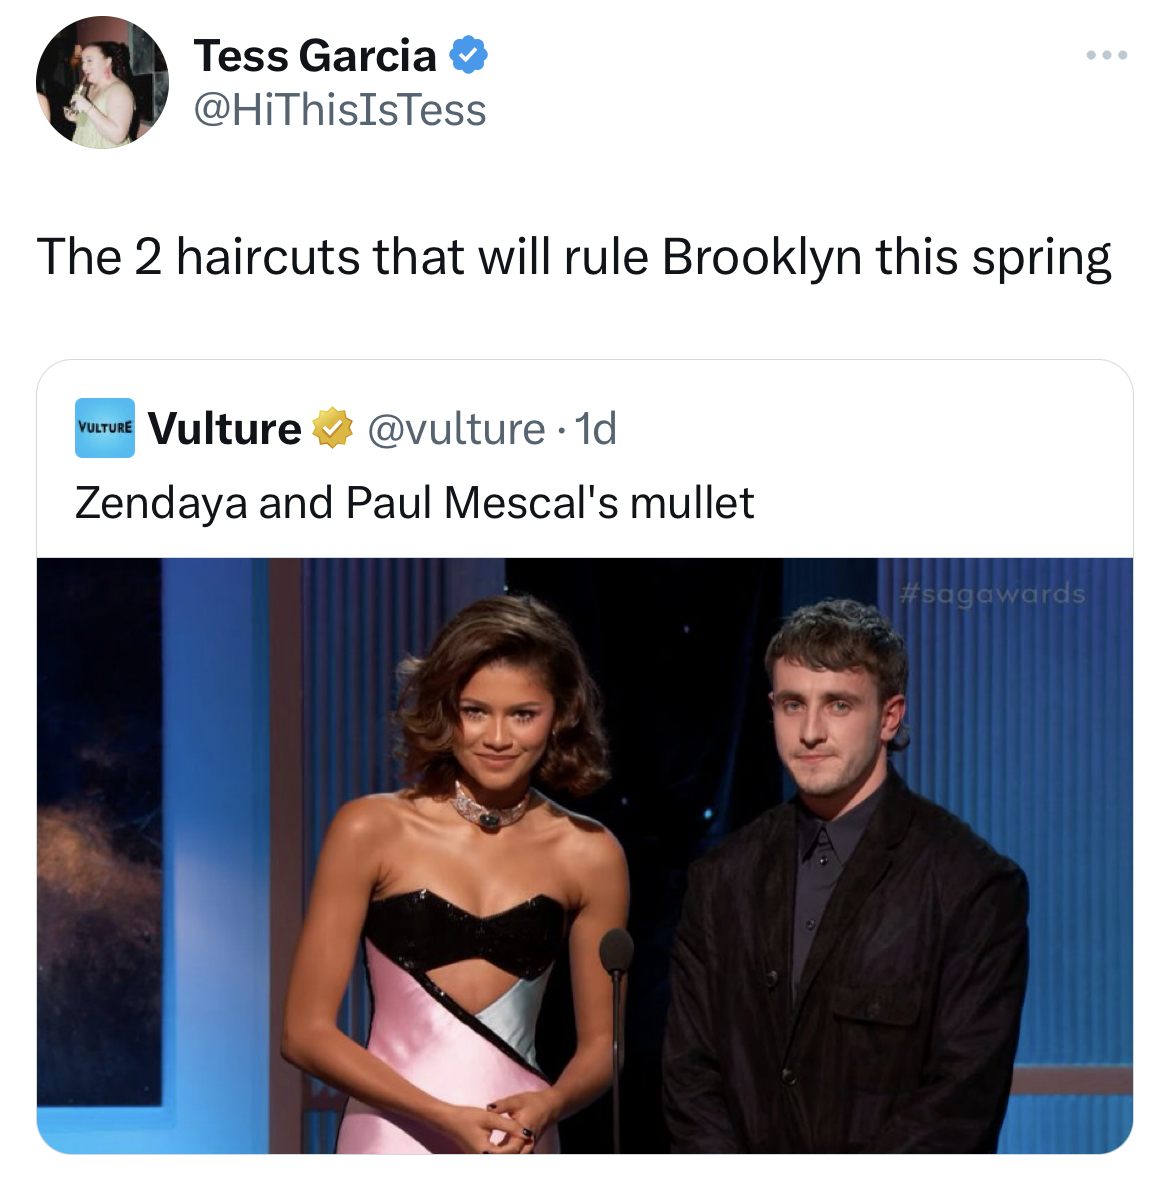 savage tweets - shoulder - Tess Garcia The 2 haircuts that will rule Brooklyn this spring Verture Vulture .1d Zendaya and Paul Mescal's mullet stigowards